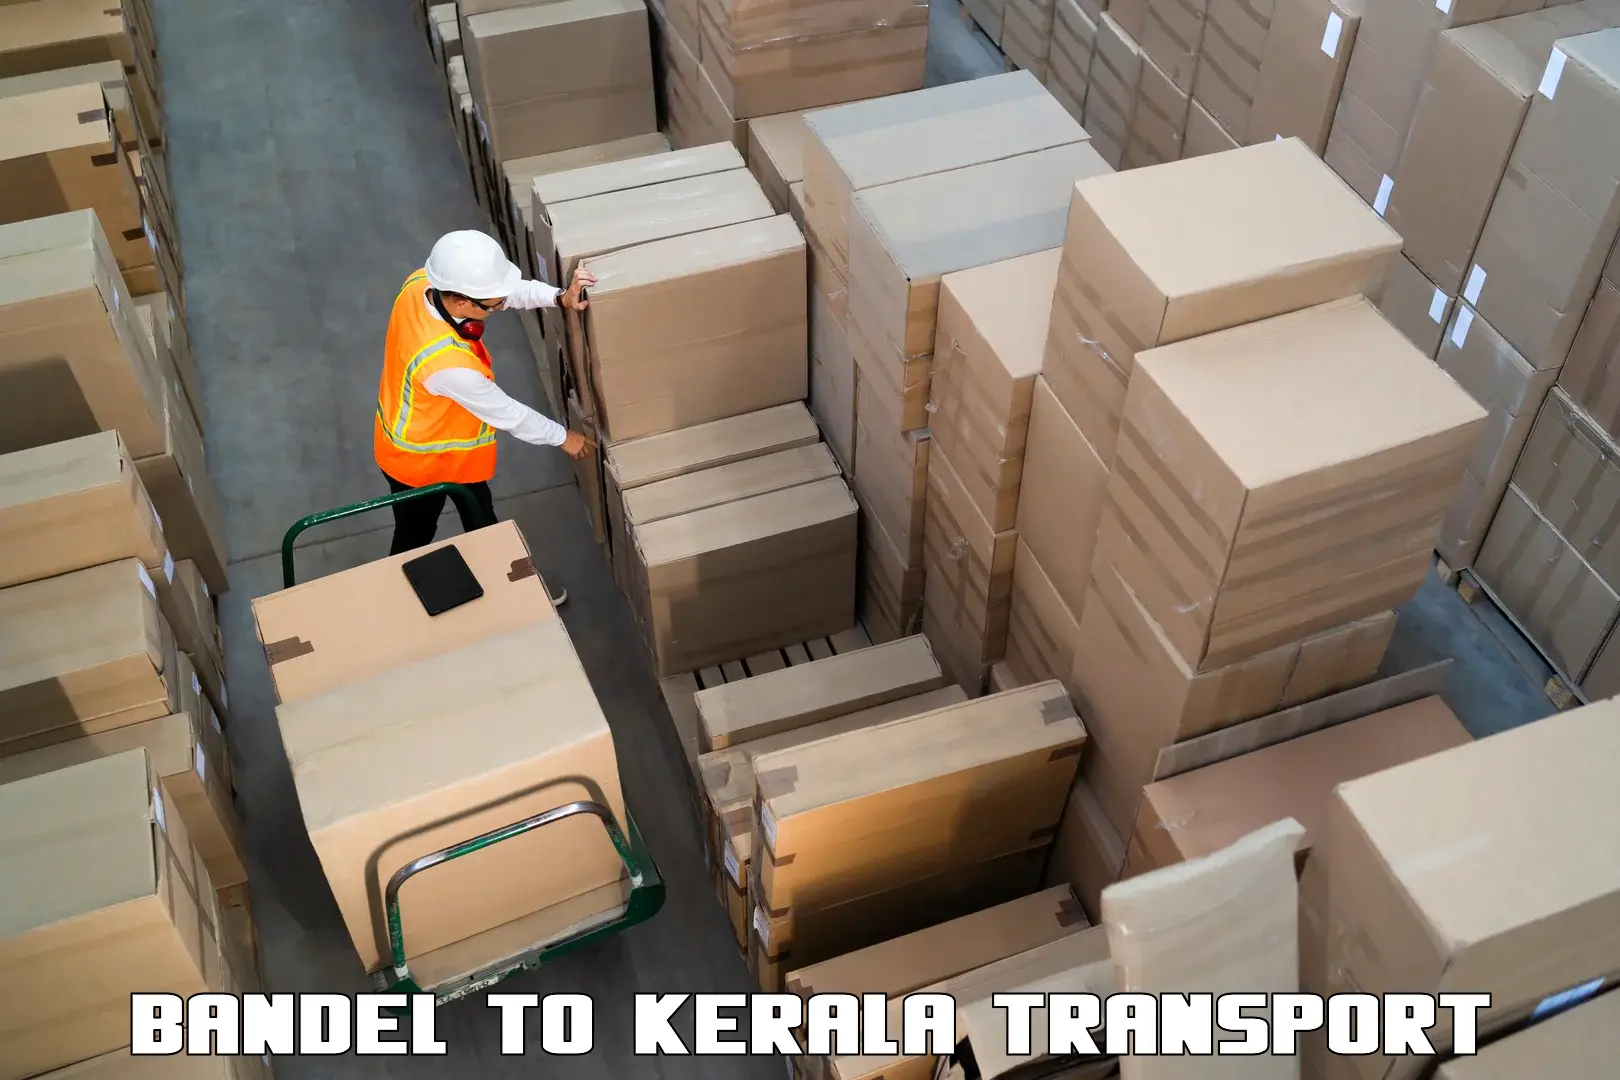 Daily transport service in Bandel to Kerala